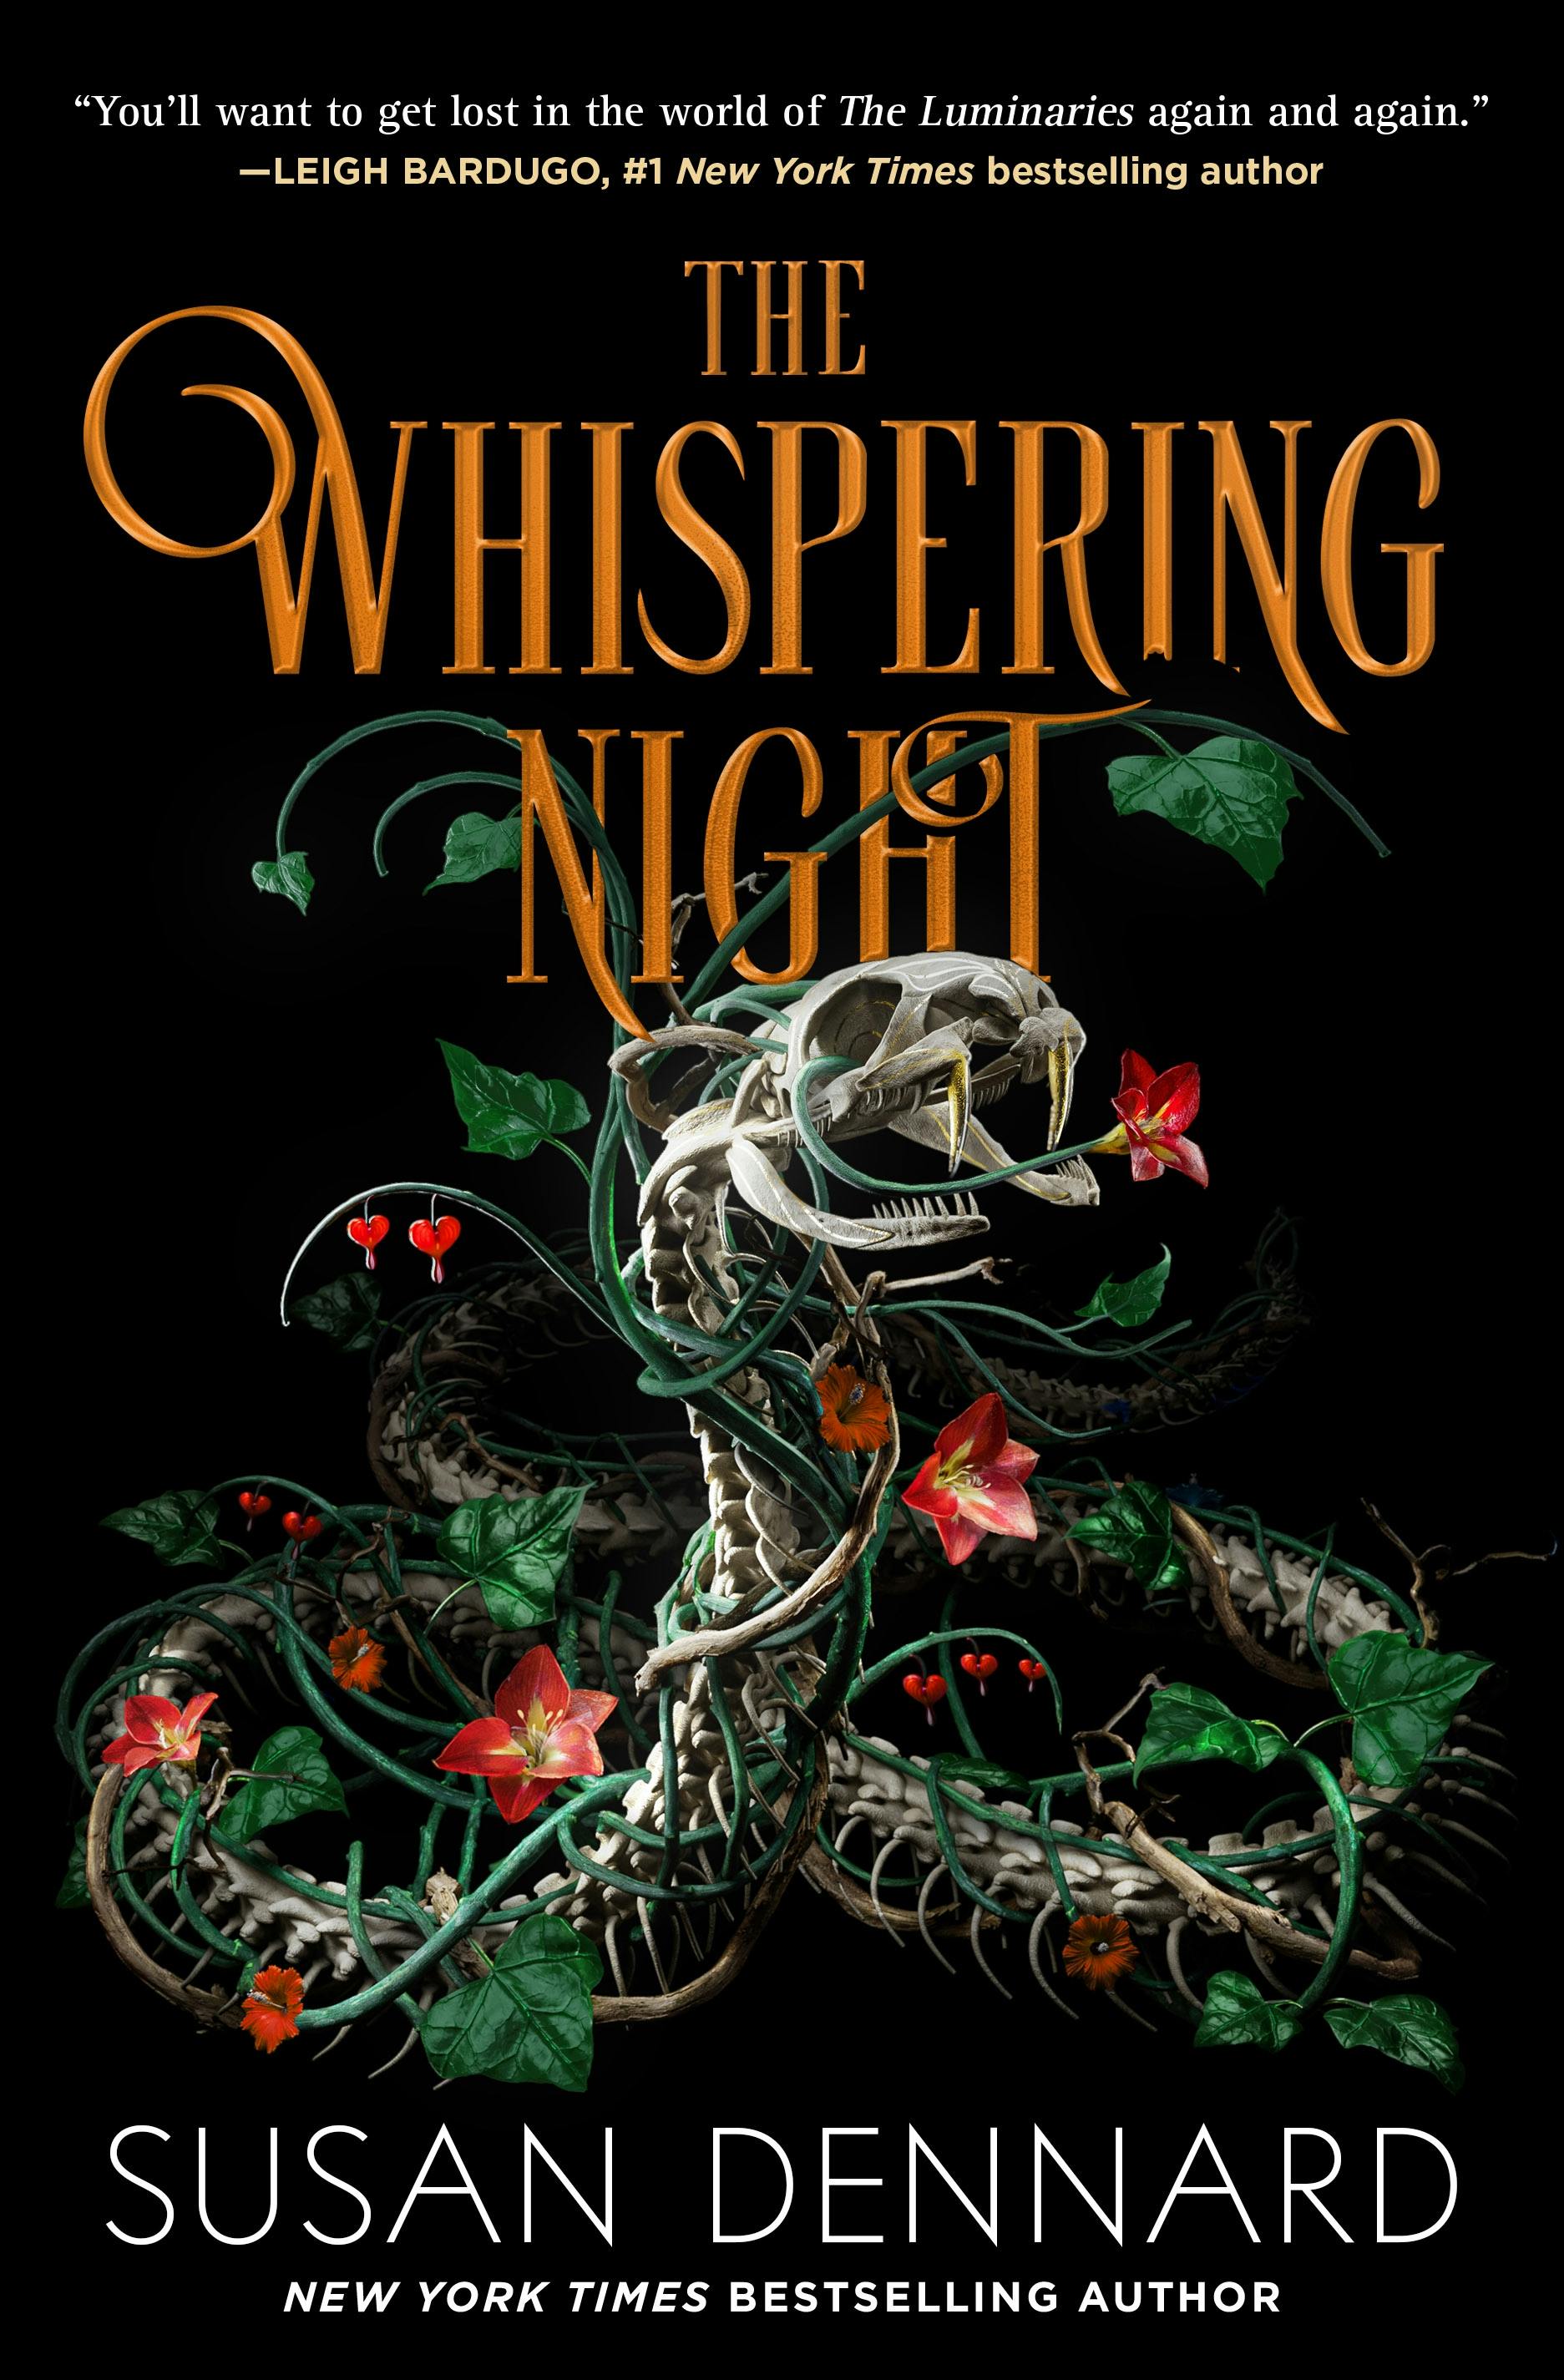 Cover for the book titled as: The Whispering Night